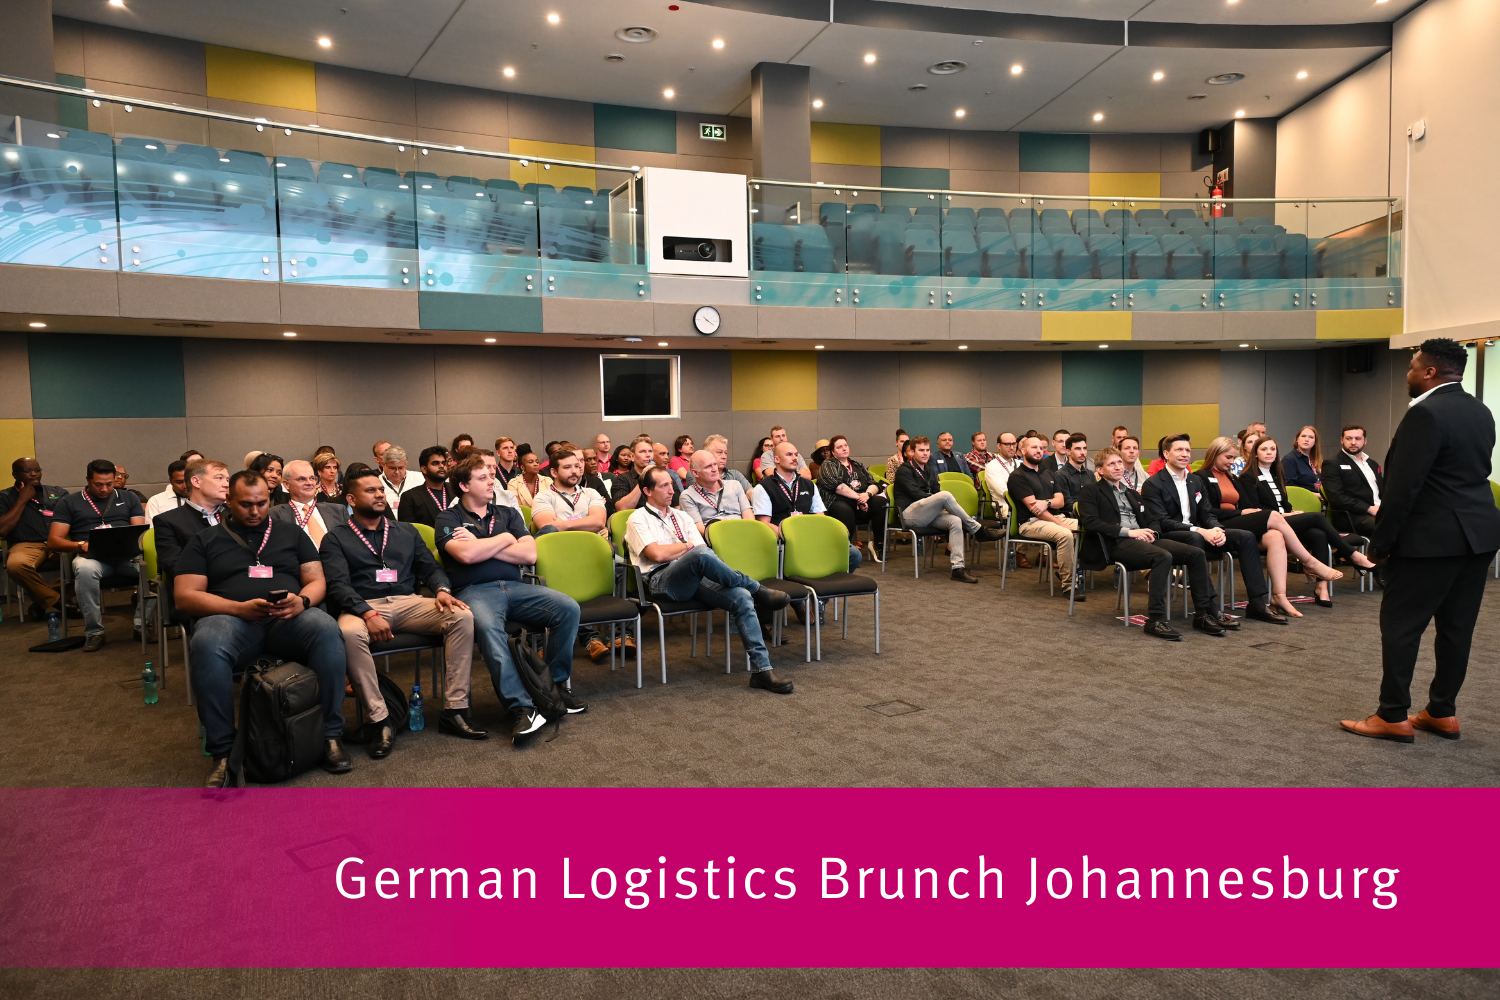 German Logistics Brunch – Opening of the new offices in Johannesburg